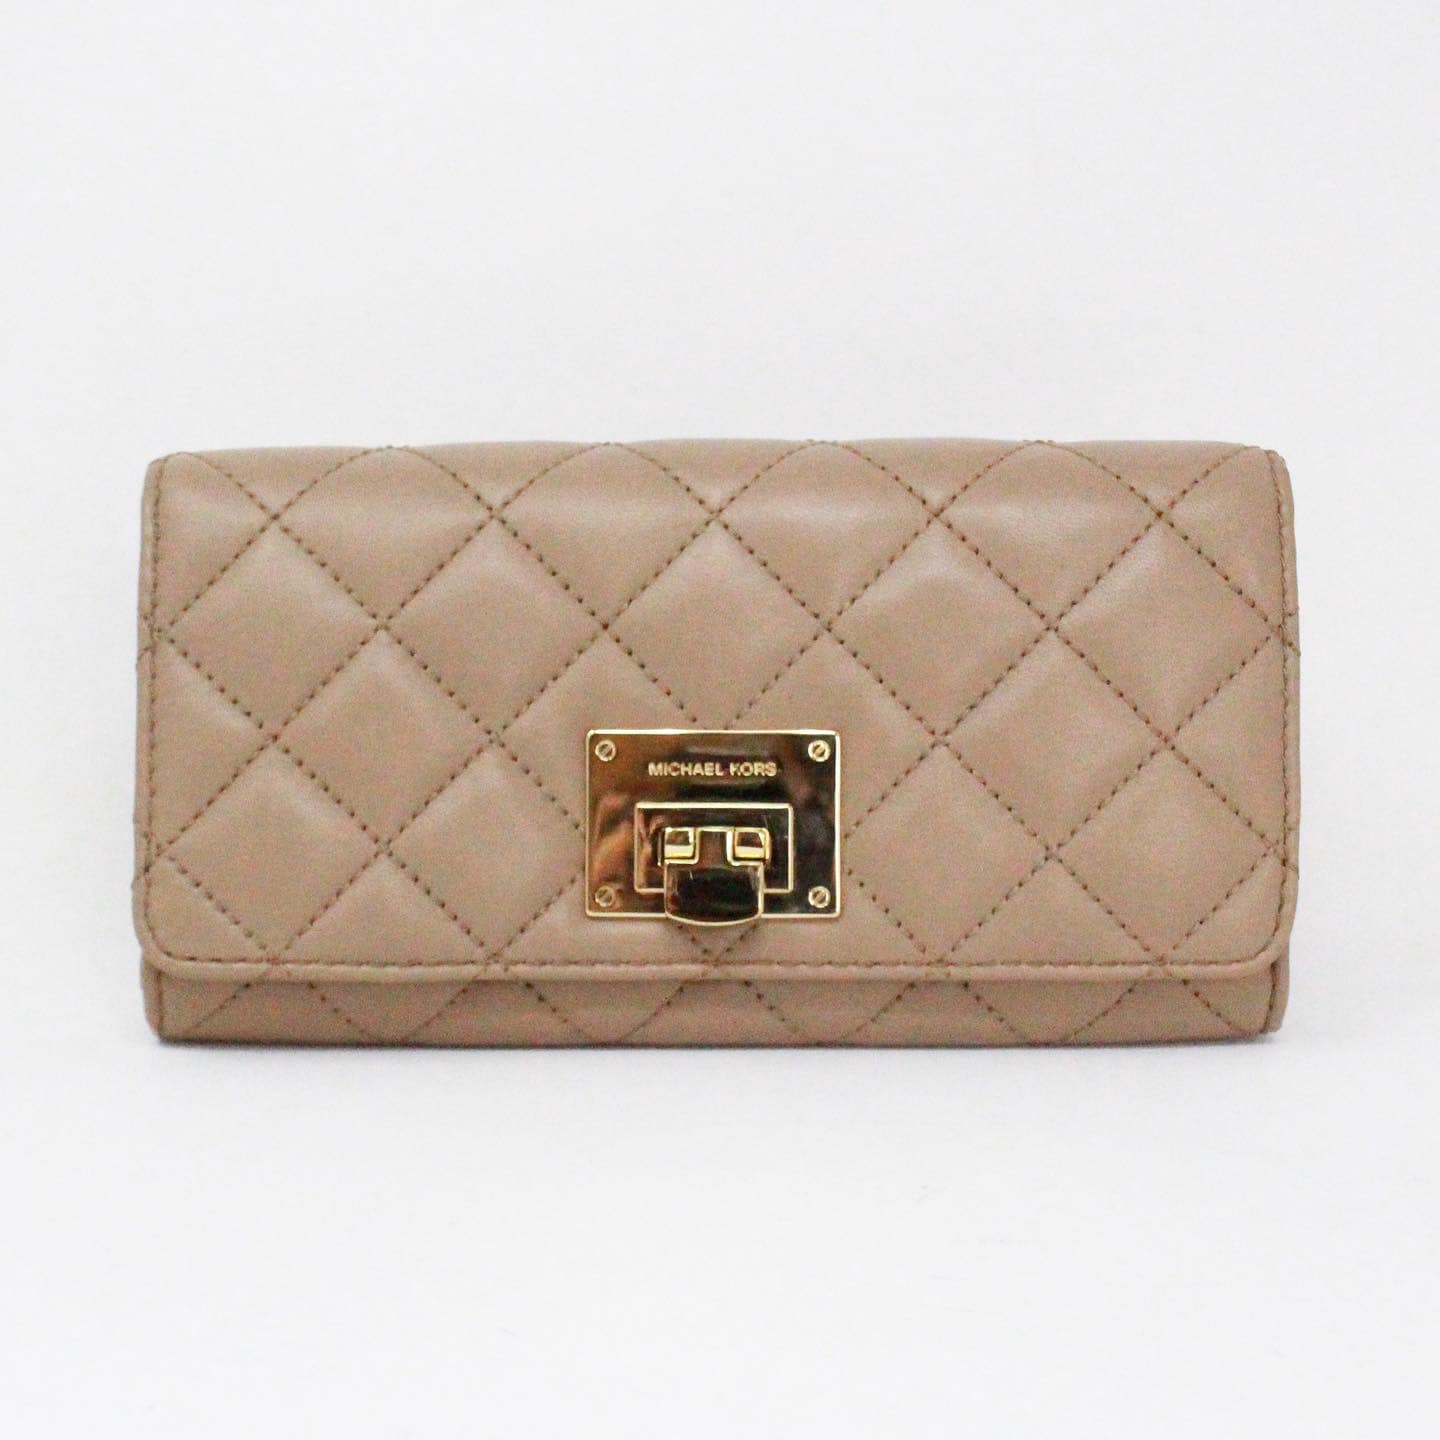 MICHAEL KORS 38460 Taupe Quilted Leather Wallet A